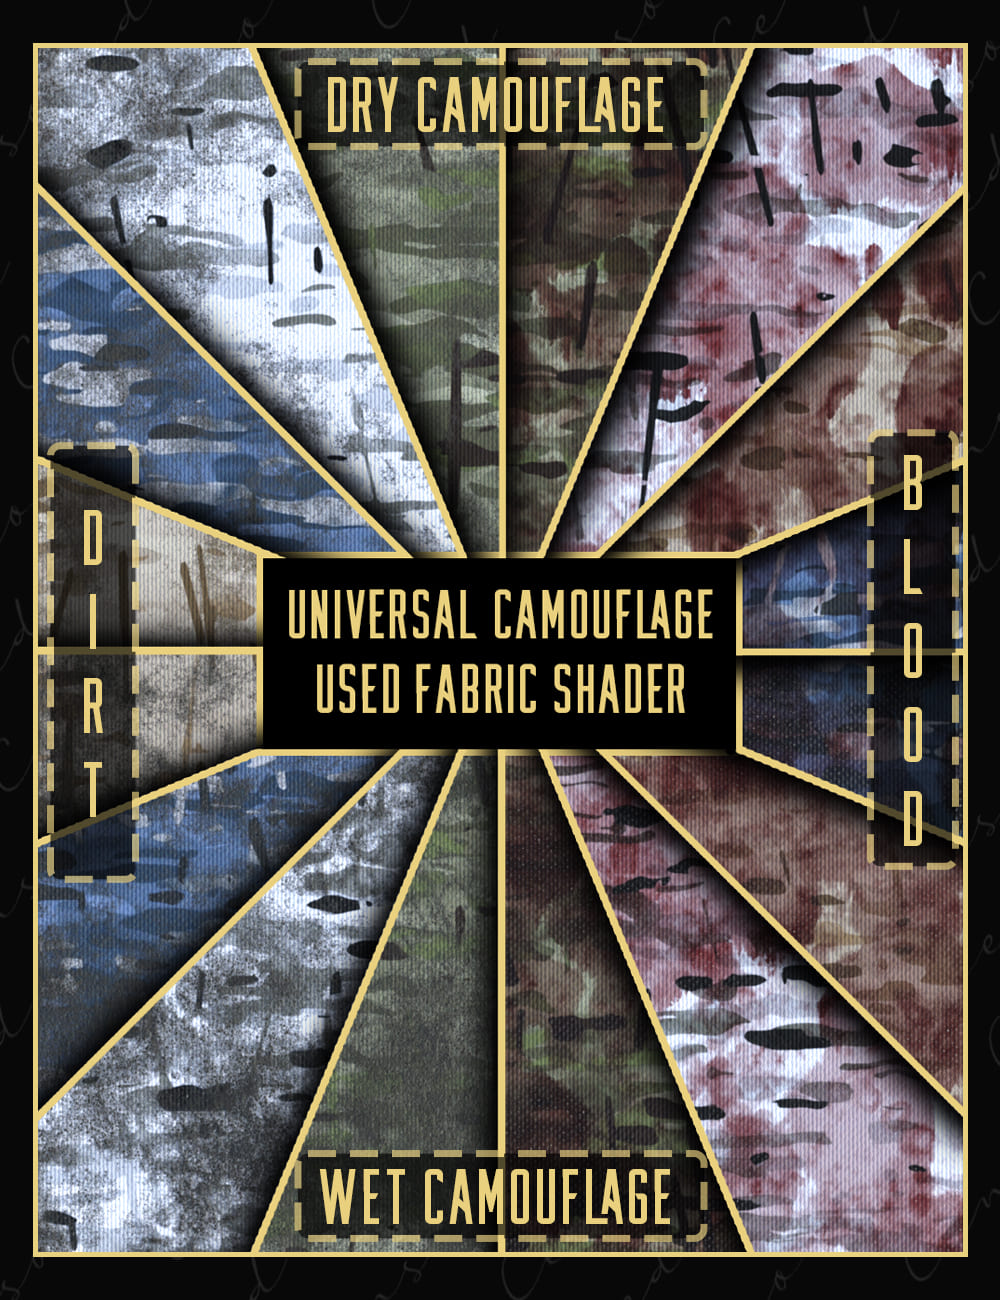 Universal Camouflage Wet and Dry Used Fabric Shaders_DAZ3D下载站